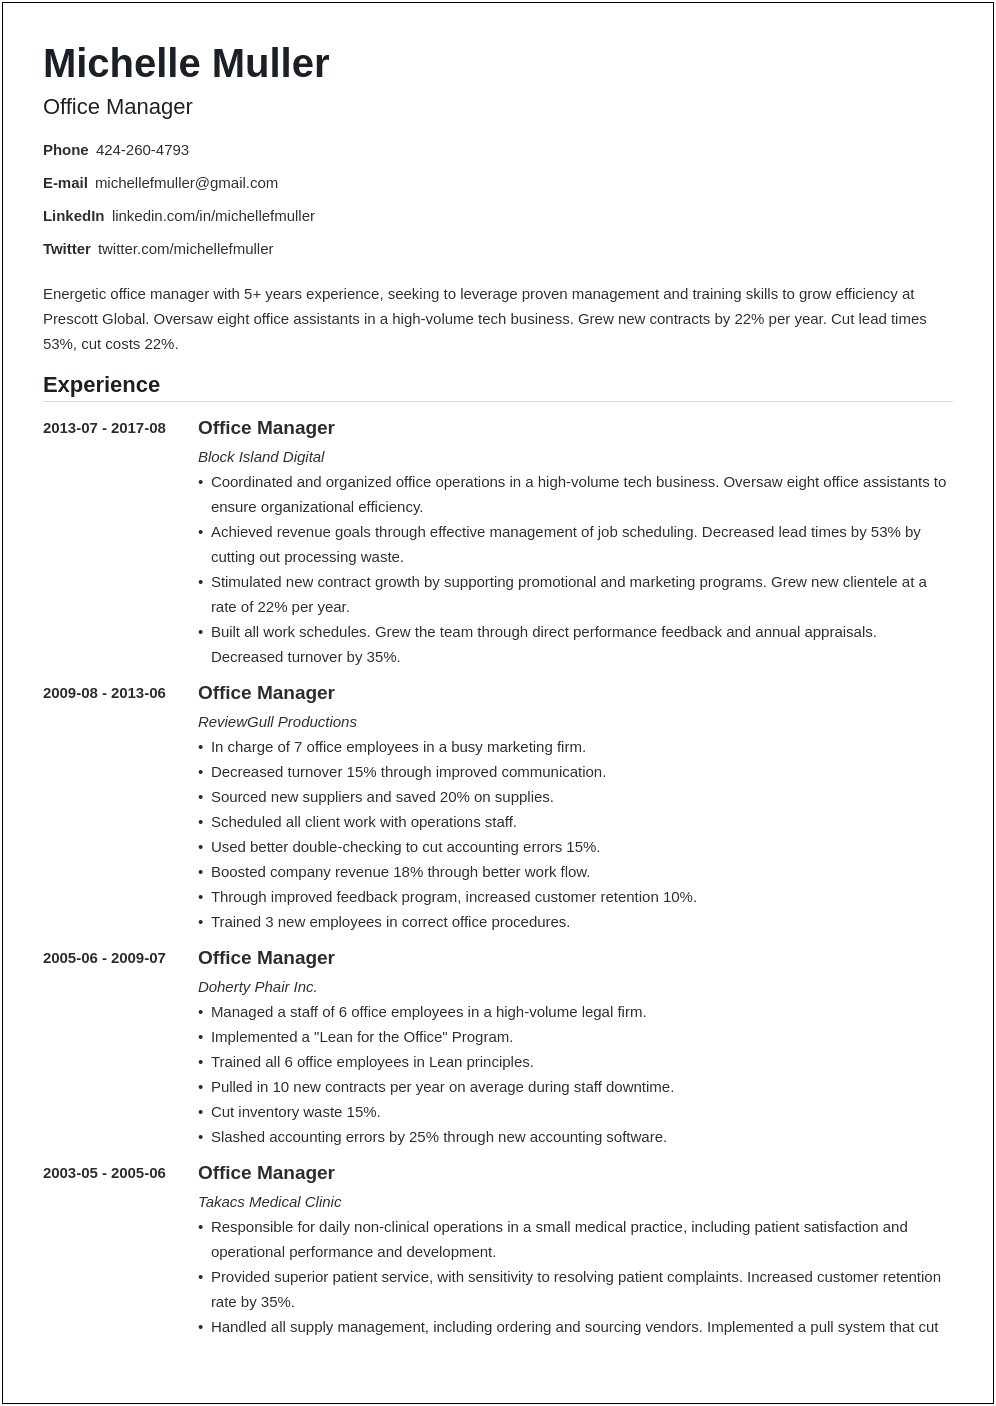 Technology Sample Resume With 20 Years Experience